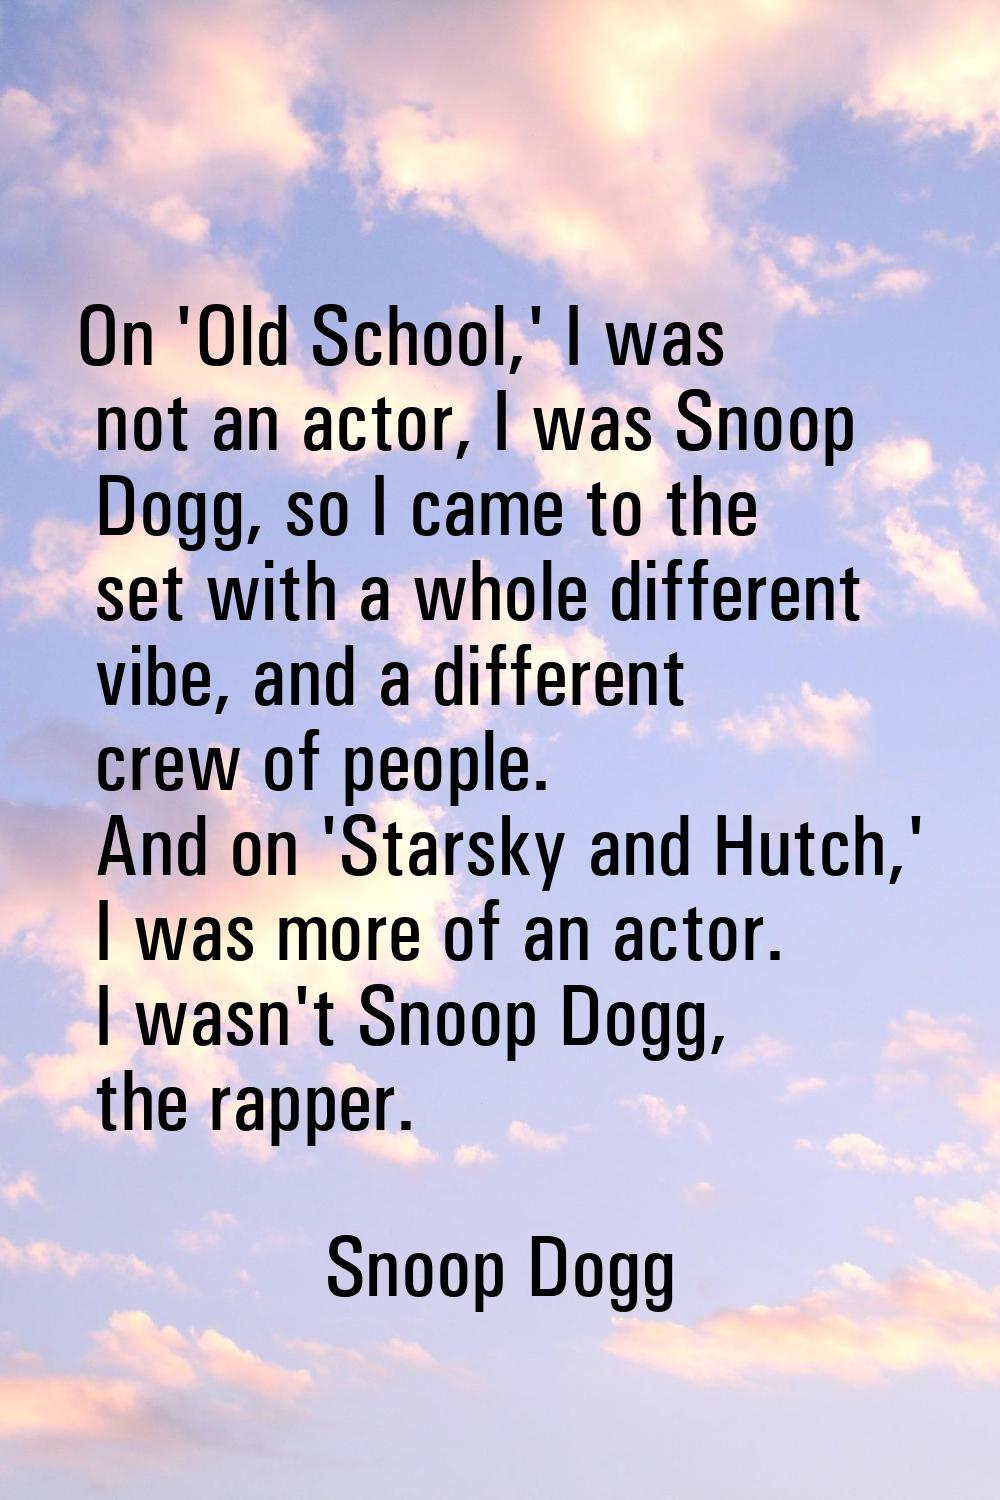 On 'Old School,' I was not an actor, I was Snoop Dogg, so I came to the set with a whole different 